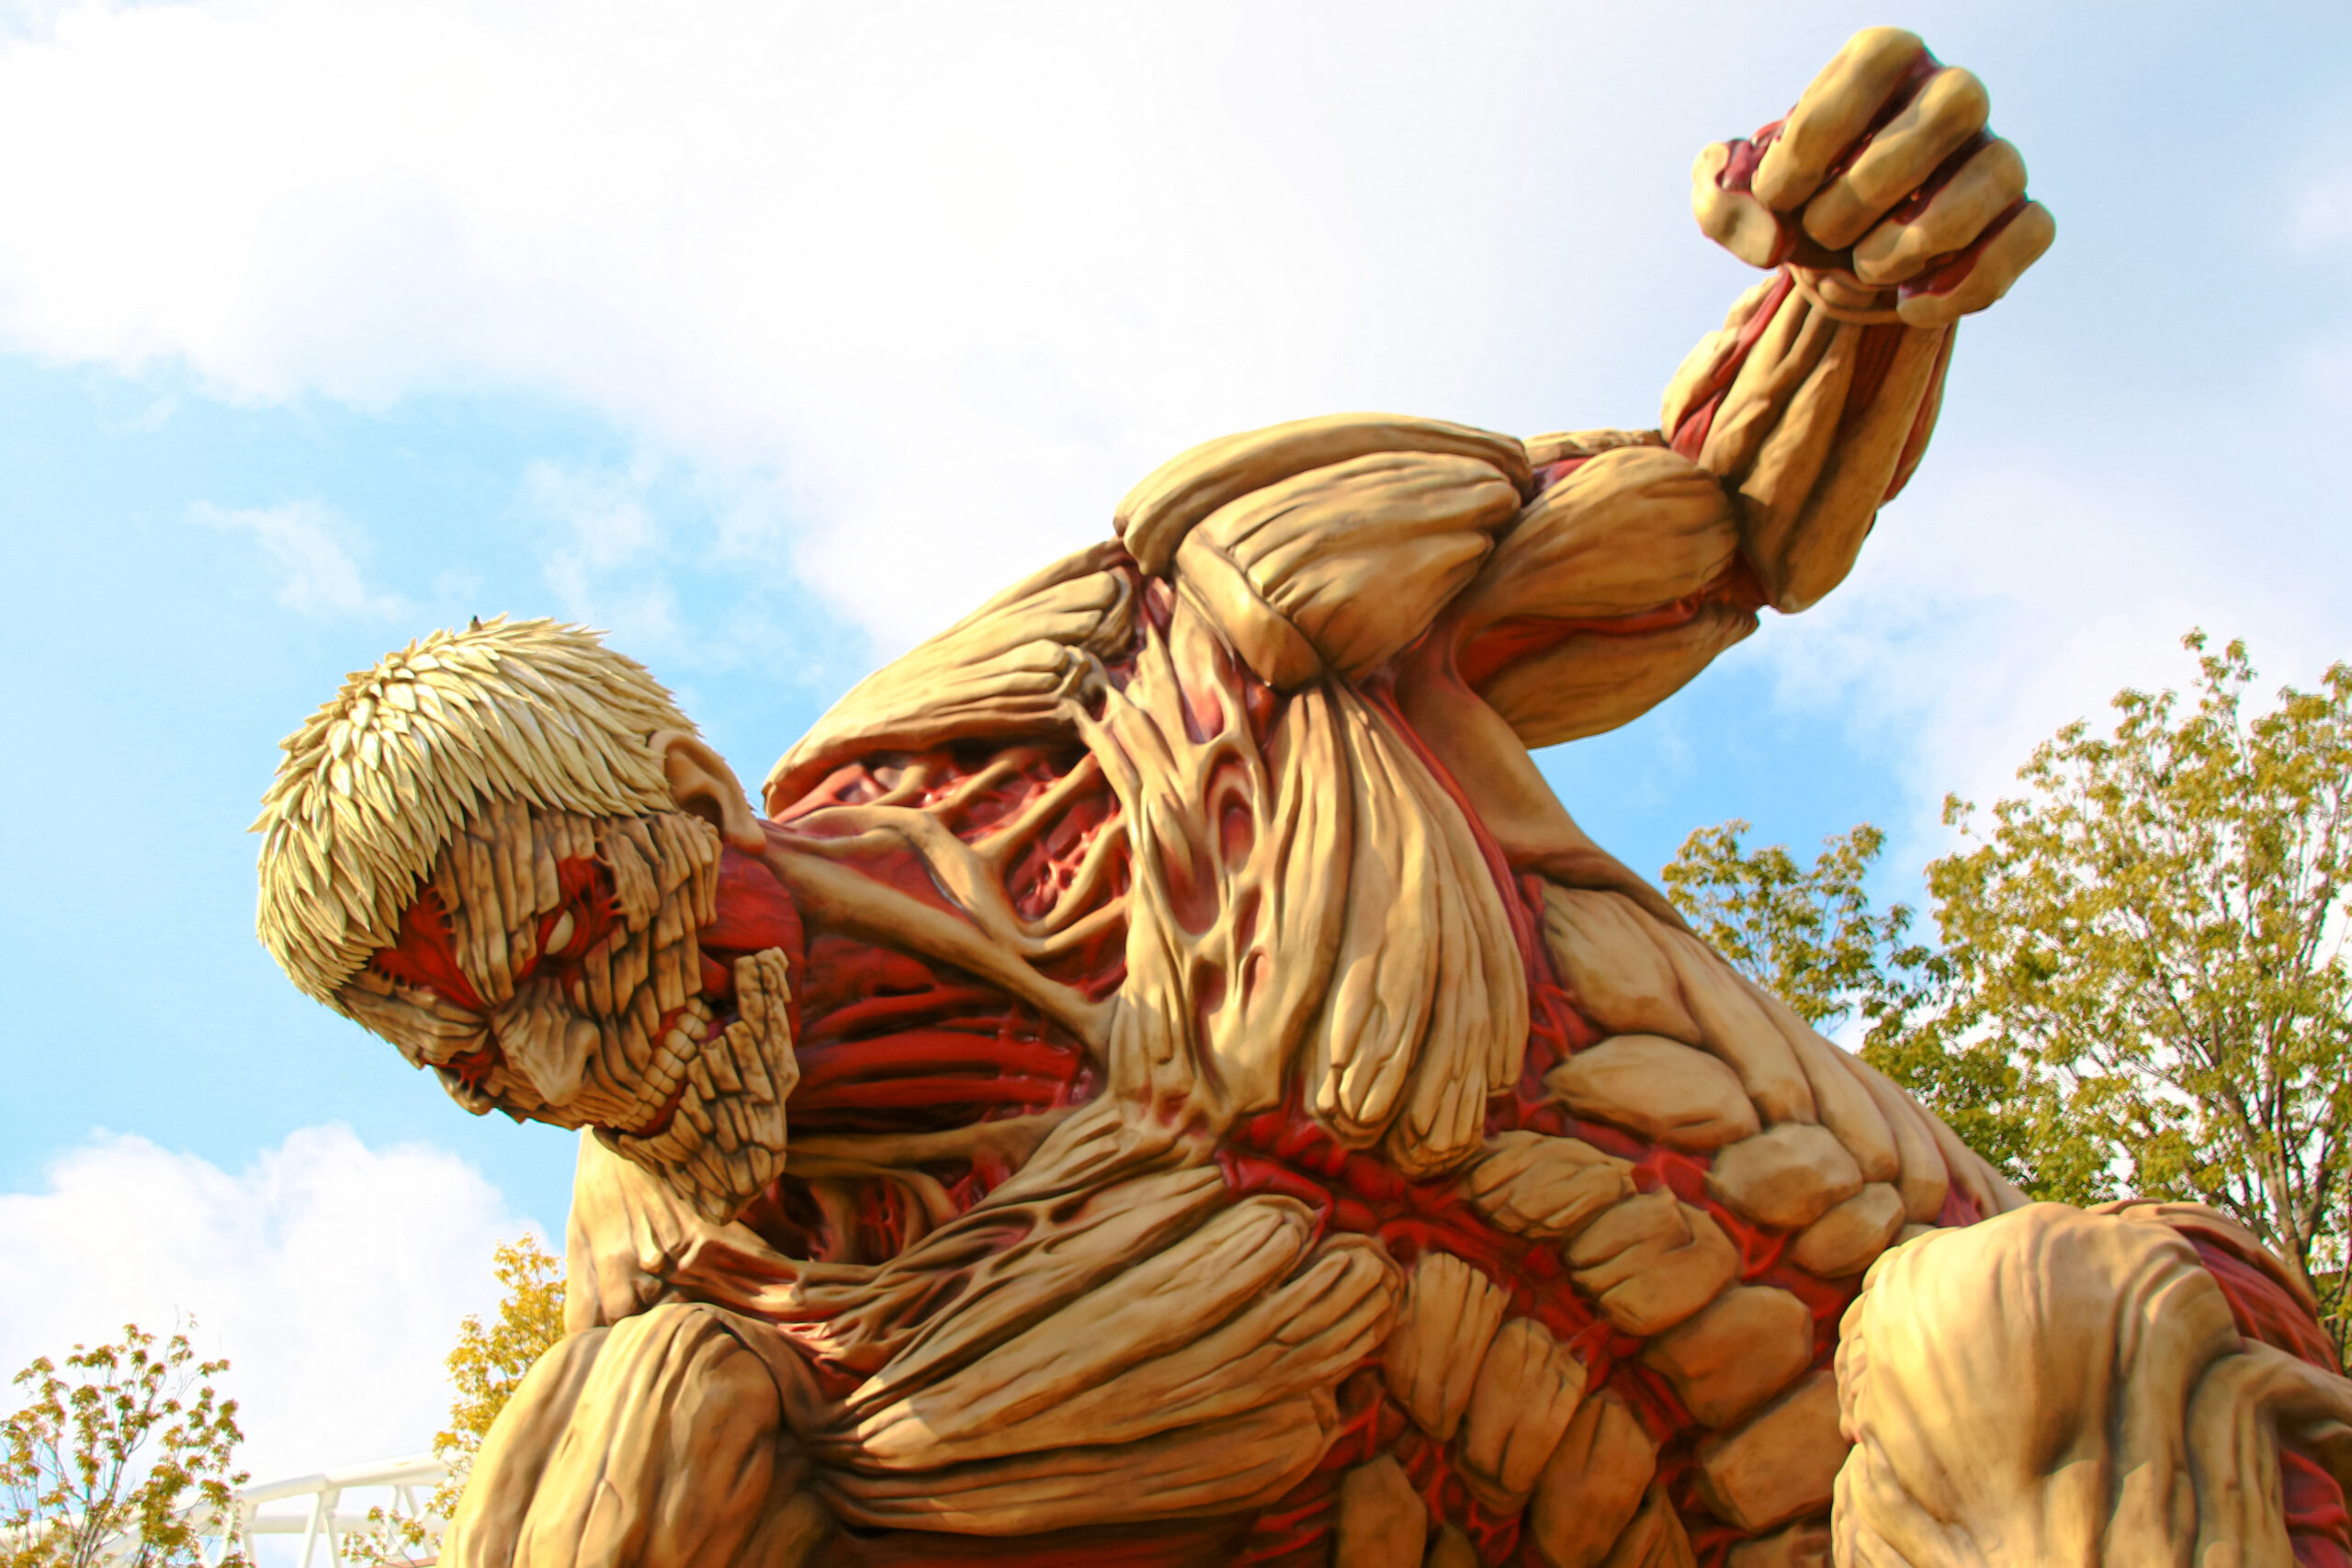 Attack on Titan Final Season Part 3 Documentary Takes Viewers